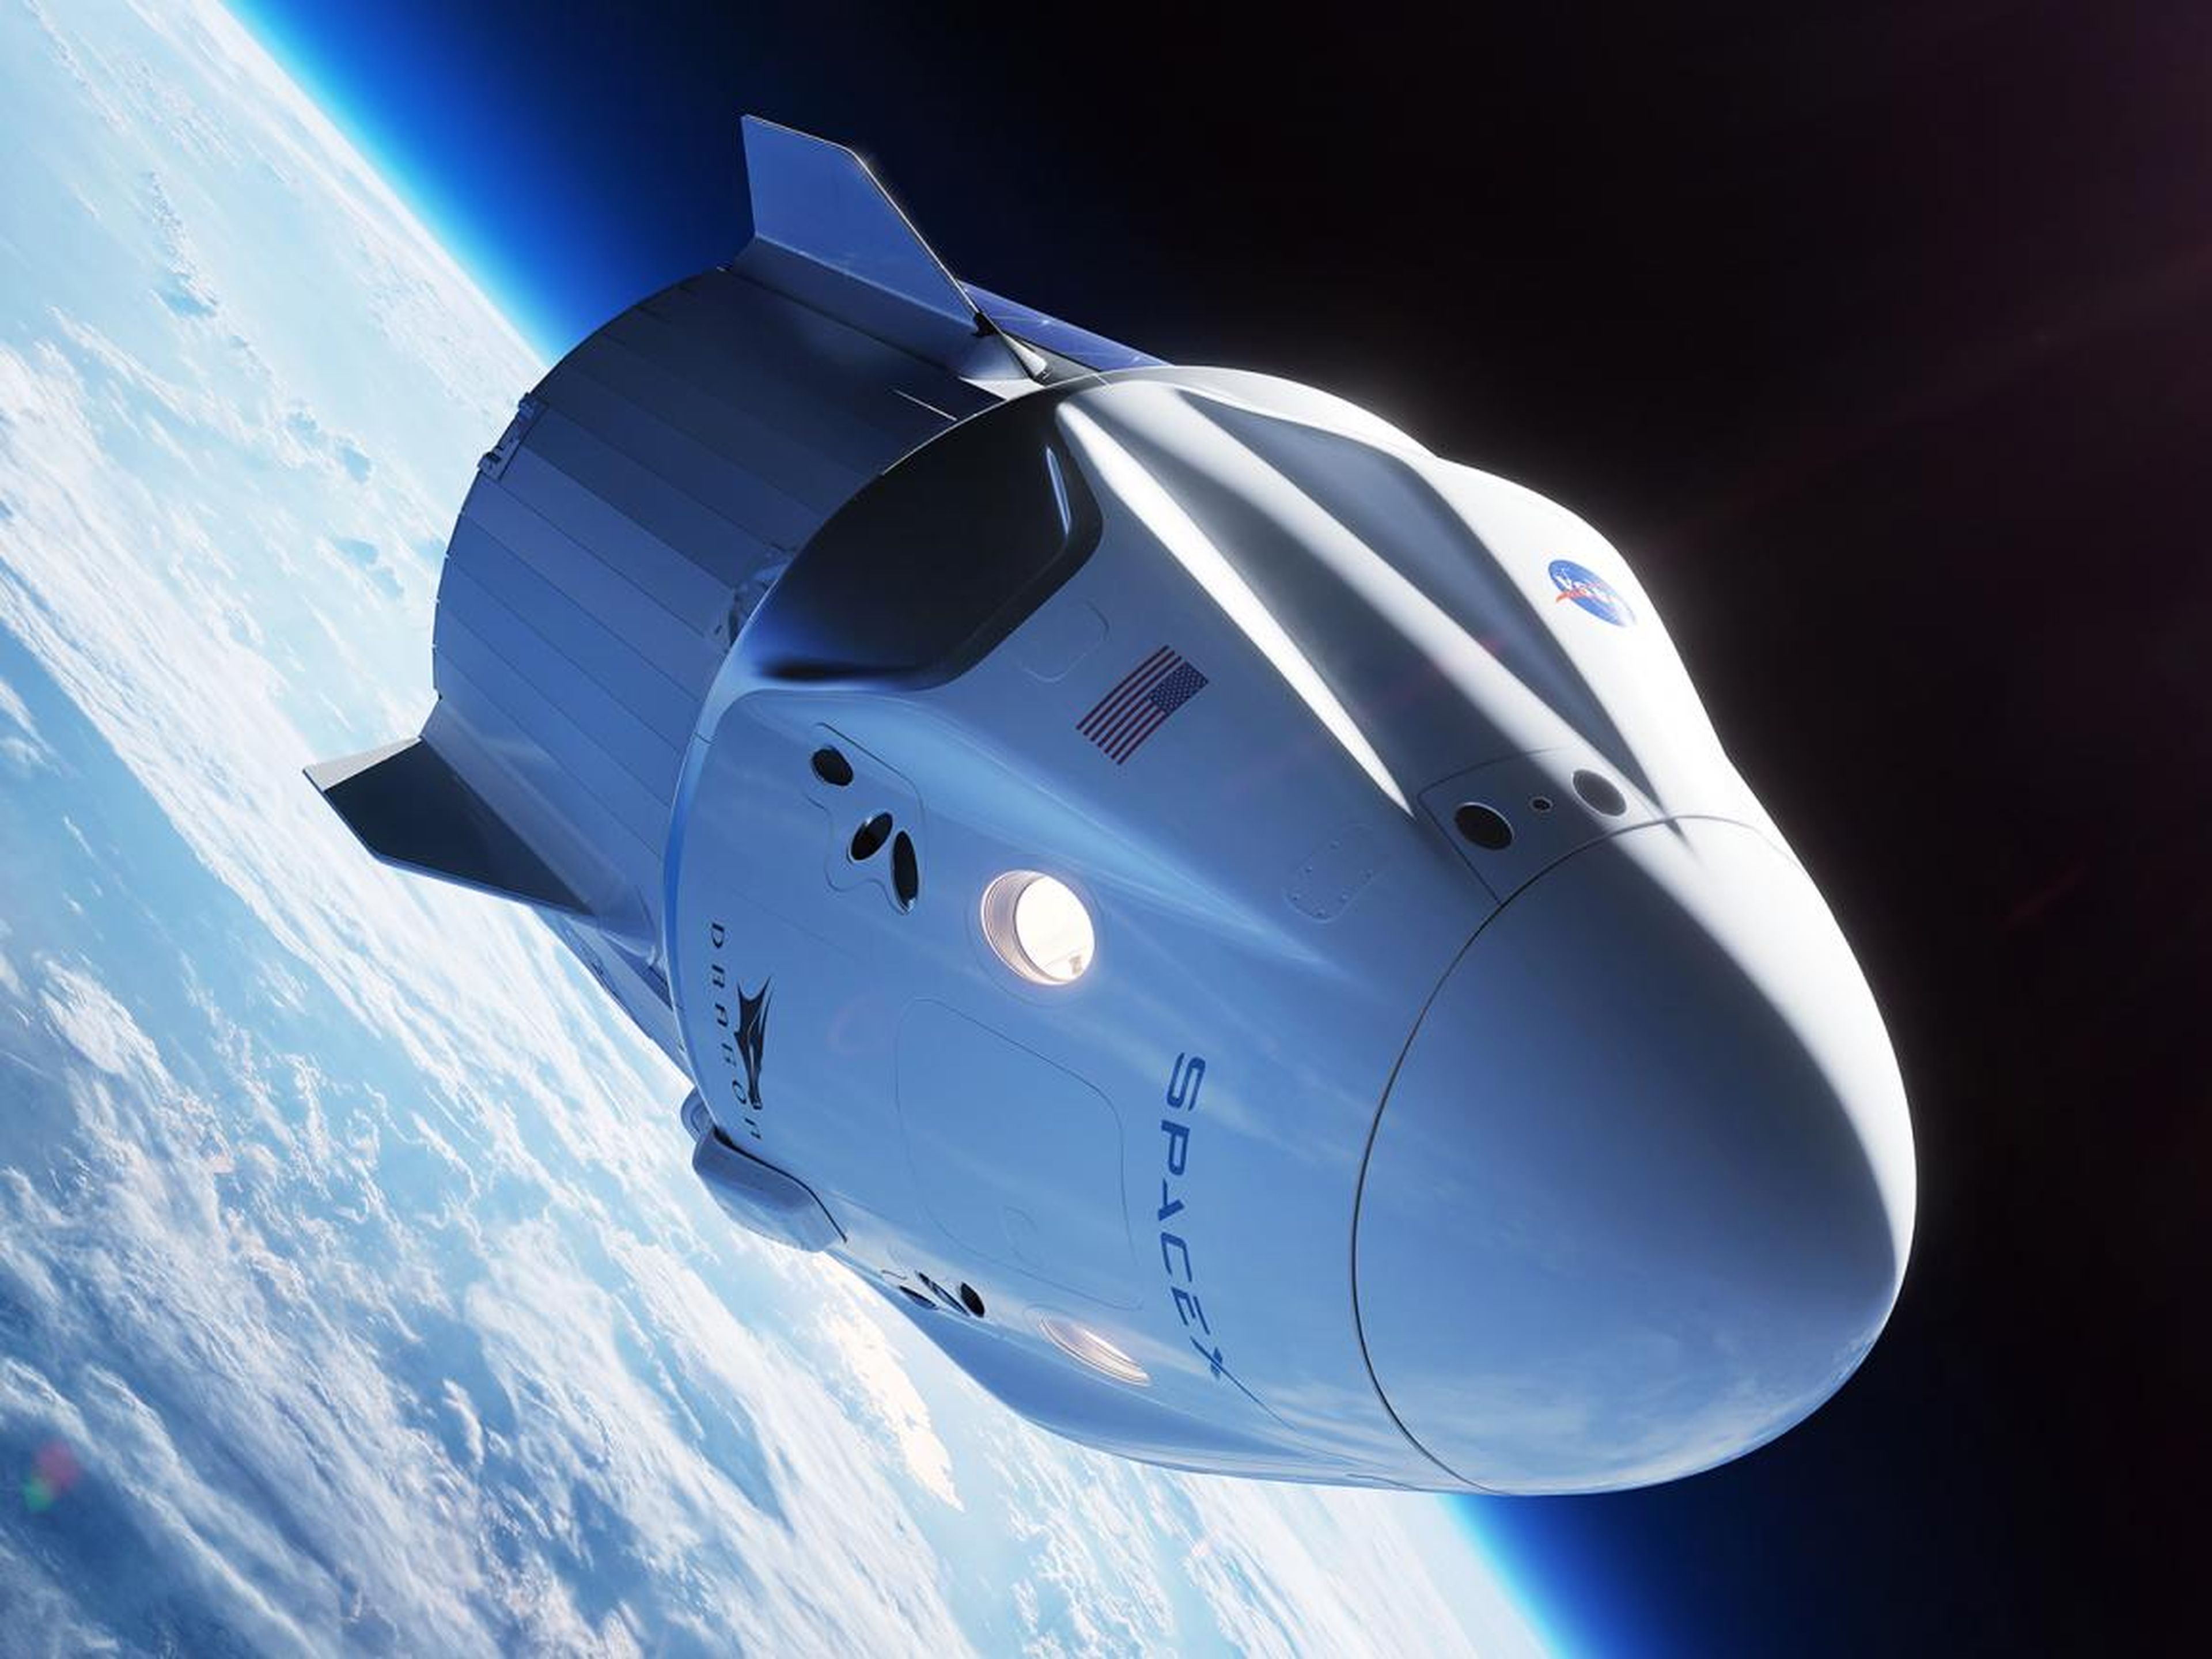 NASA said SpaceX will do a test launch of its "Crew Dragon" spacecraft.